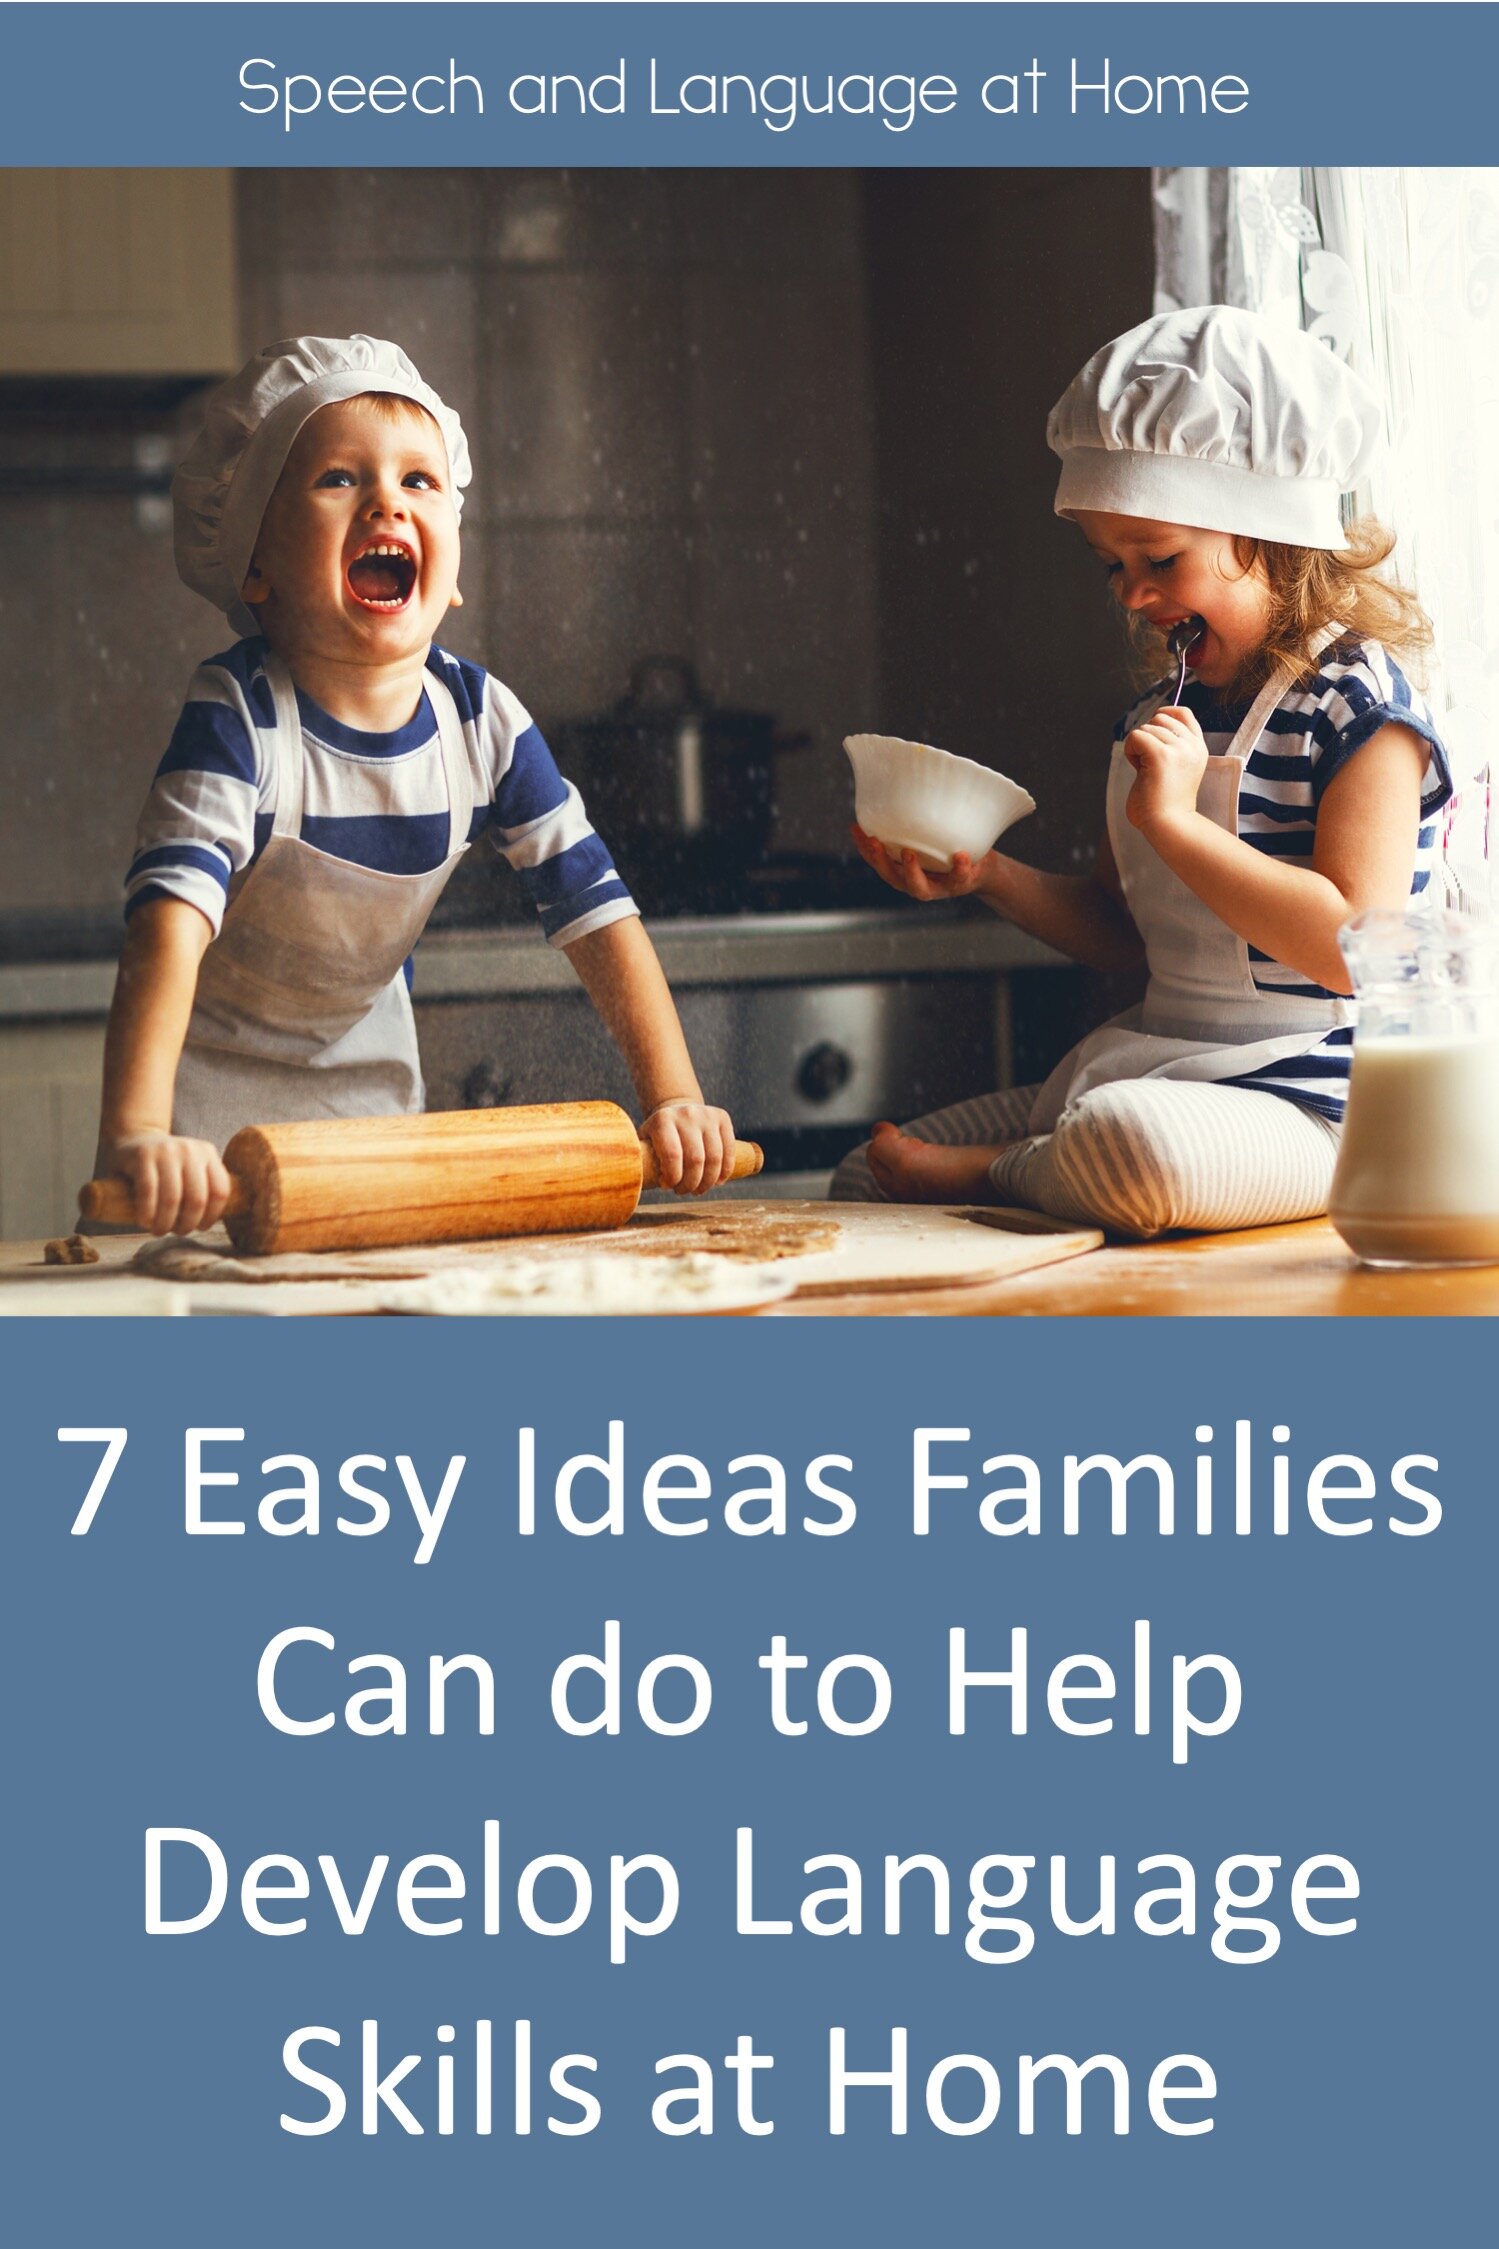 7 early ideas families can do to help develop language skills at home. Parents and caregivers can build their child language skills at home by retelling stories and exploring interests. Learn more by clicking here.